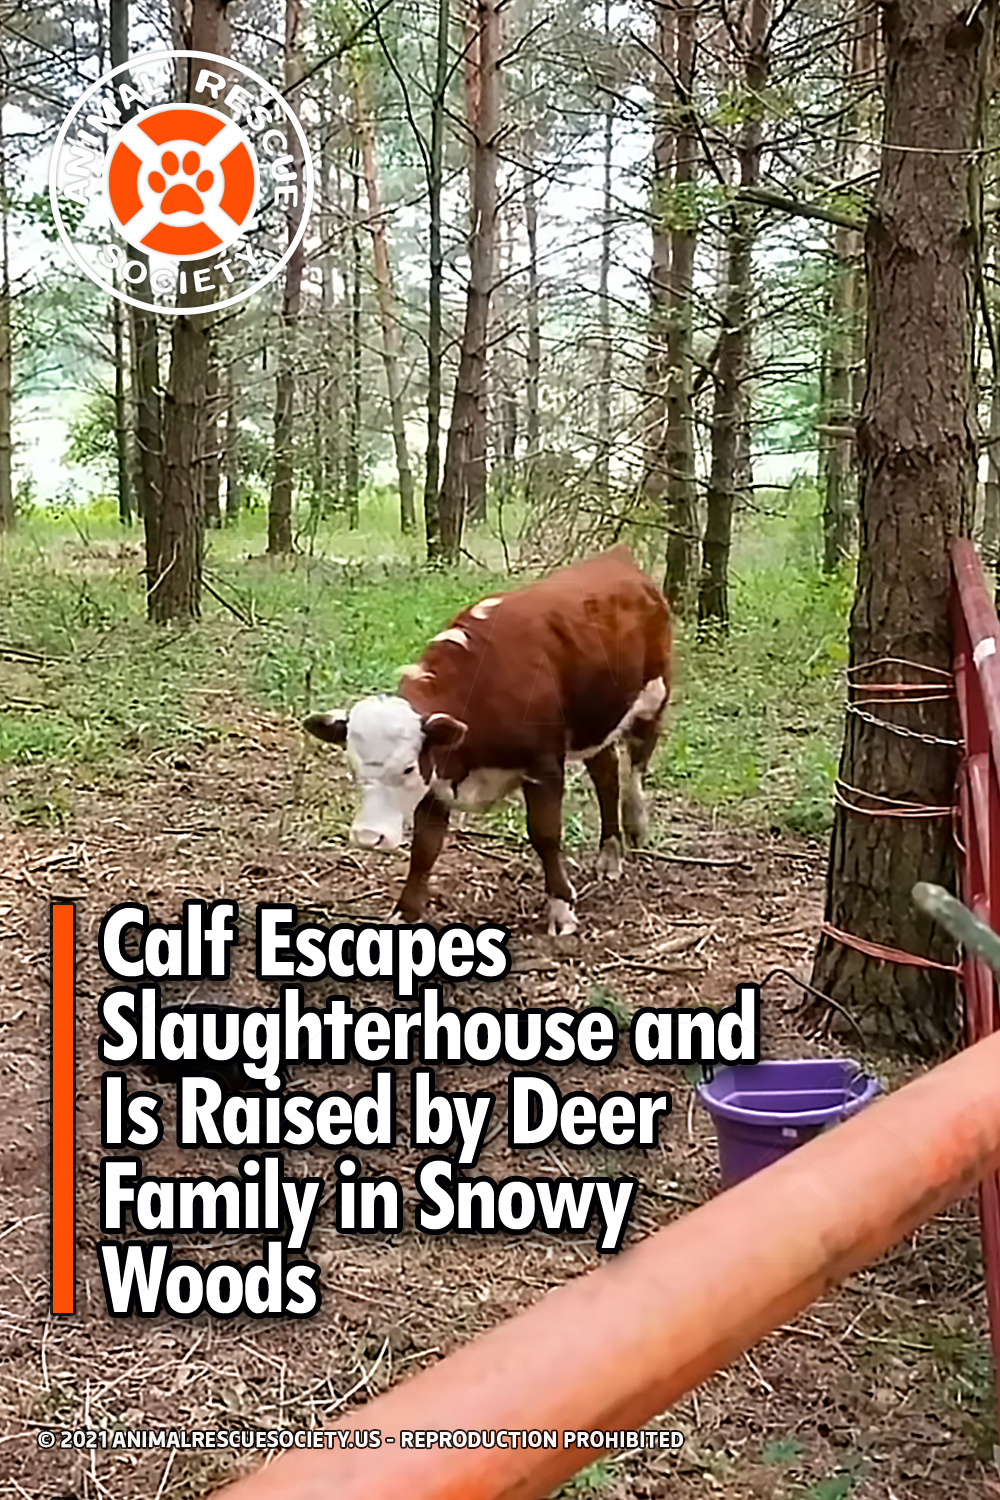 Calf Escapes Slaughterhouse and Is Raised by Deer Family in Snowy Woods